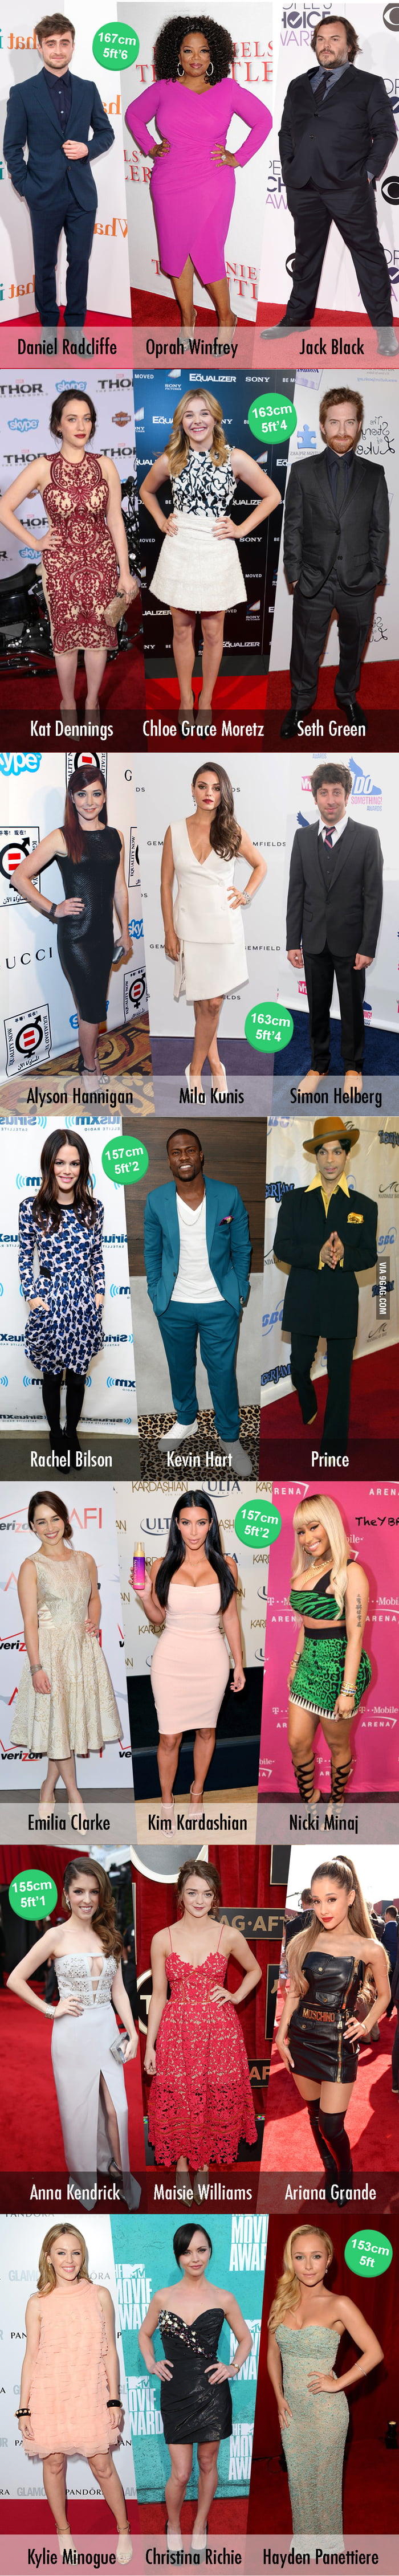 Some celebs are shorter than you think! - pt. 1